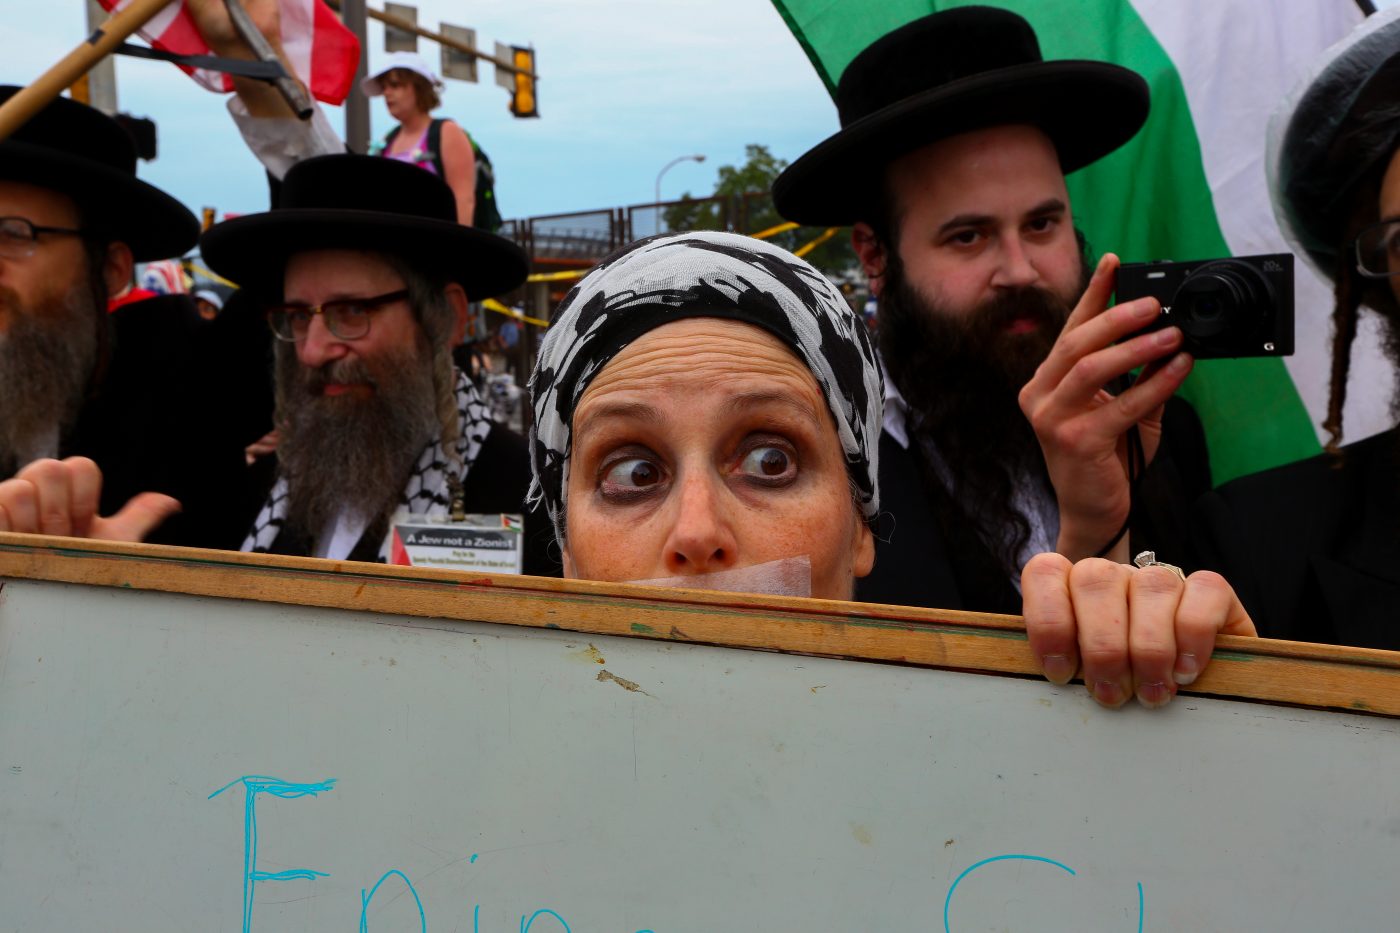 A woman walks slowly between two opposing groups of Jewish demonstrators, both for and against the state of Israel, on the last day of the 2016 Democratic National Convention in Philadelphia, July 28.